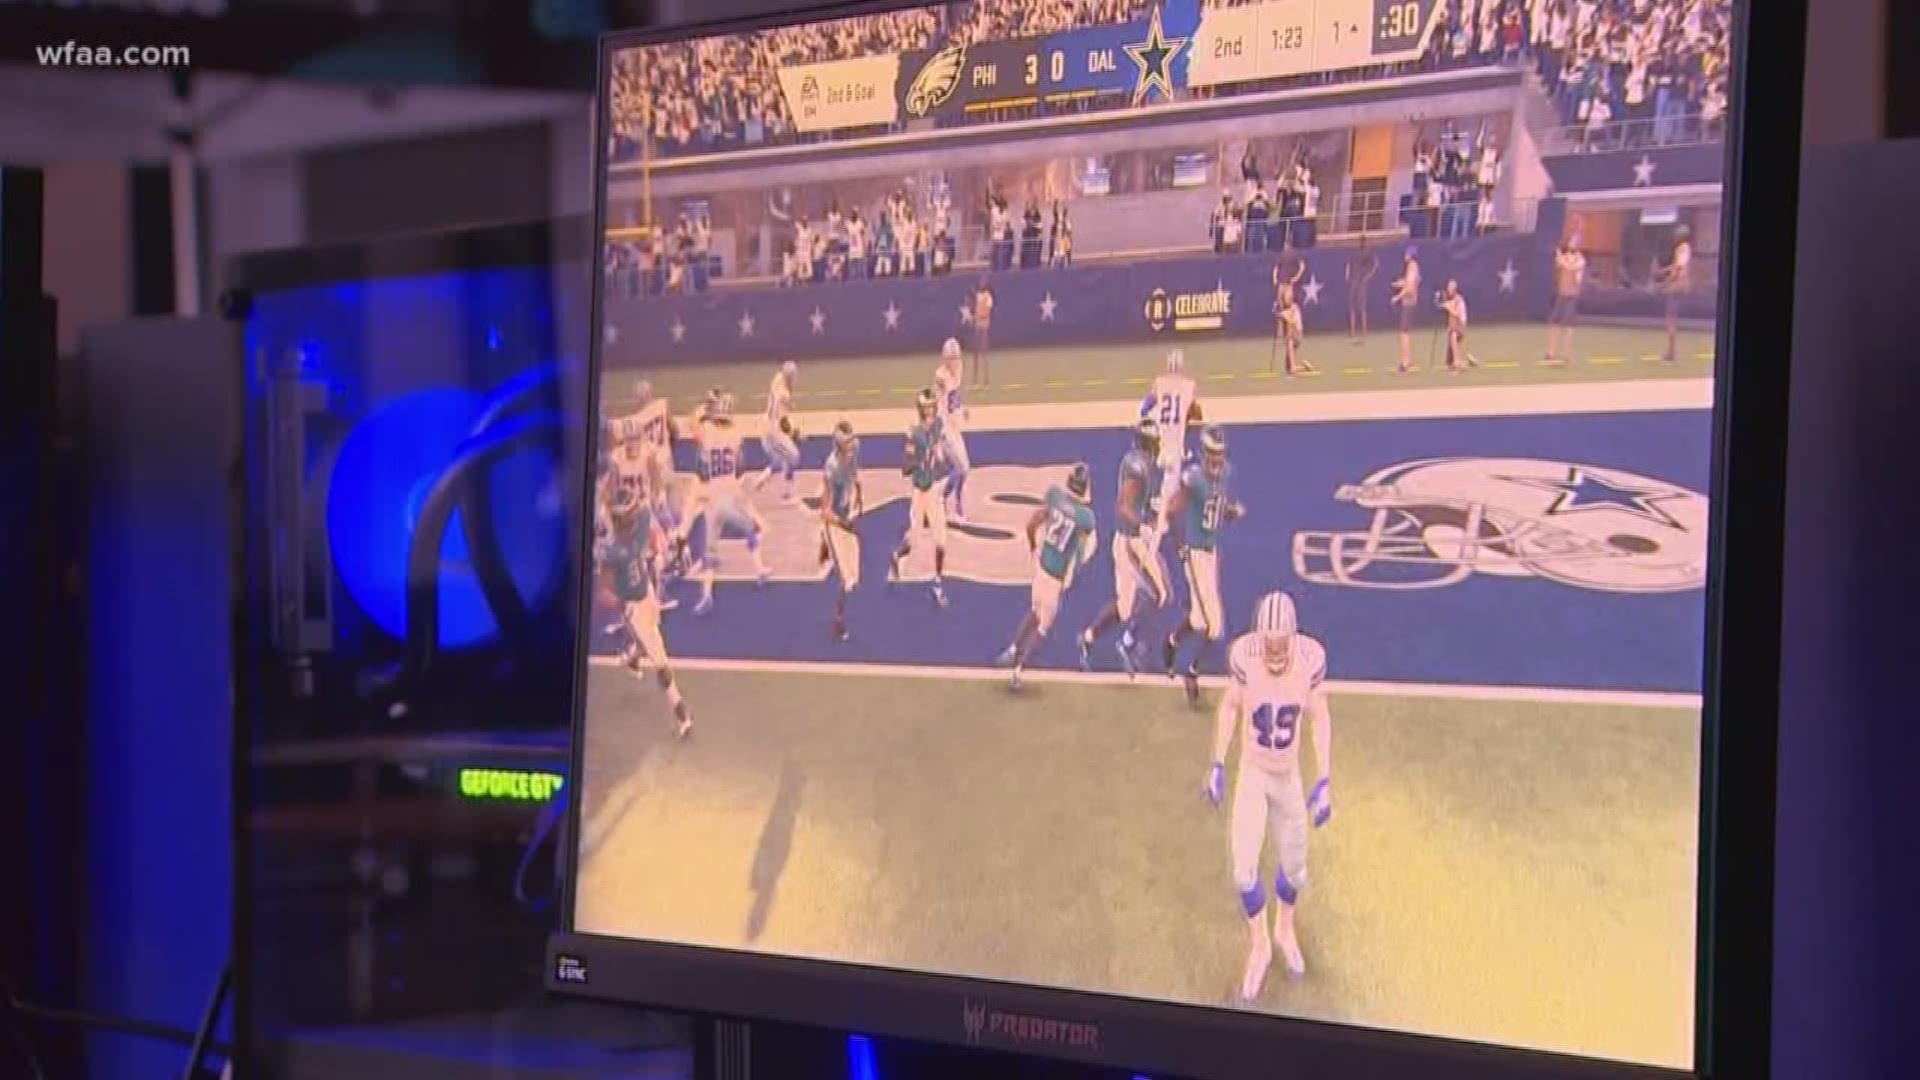 WFAA reporter Eric Alvarez went to the E-Sports Stadium in Arlington to take "Zeke Watch" into his own hands, literally. He simulated the Madden video game to see what it says will happen to the Cowboys season with Ezekiel Elliott and without him.